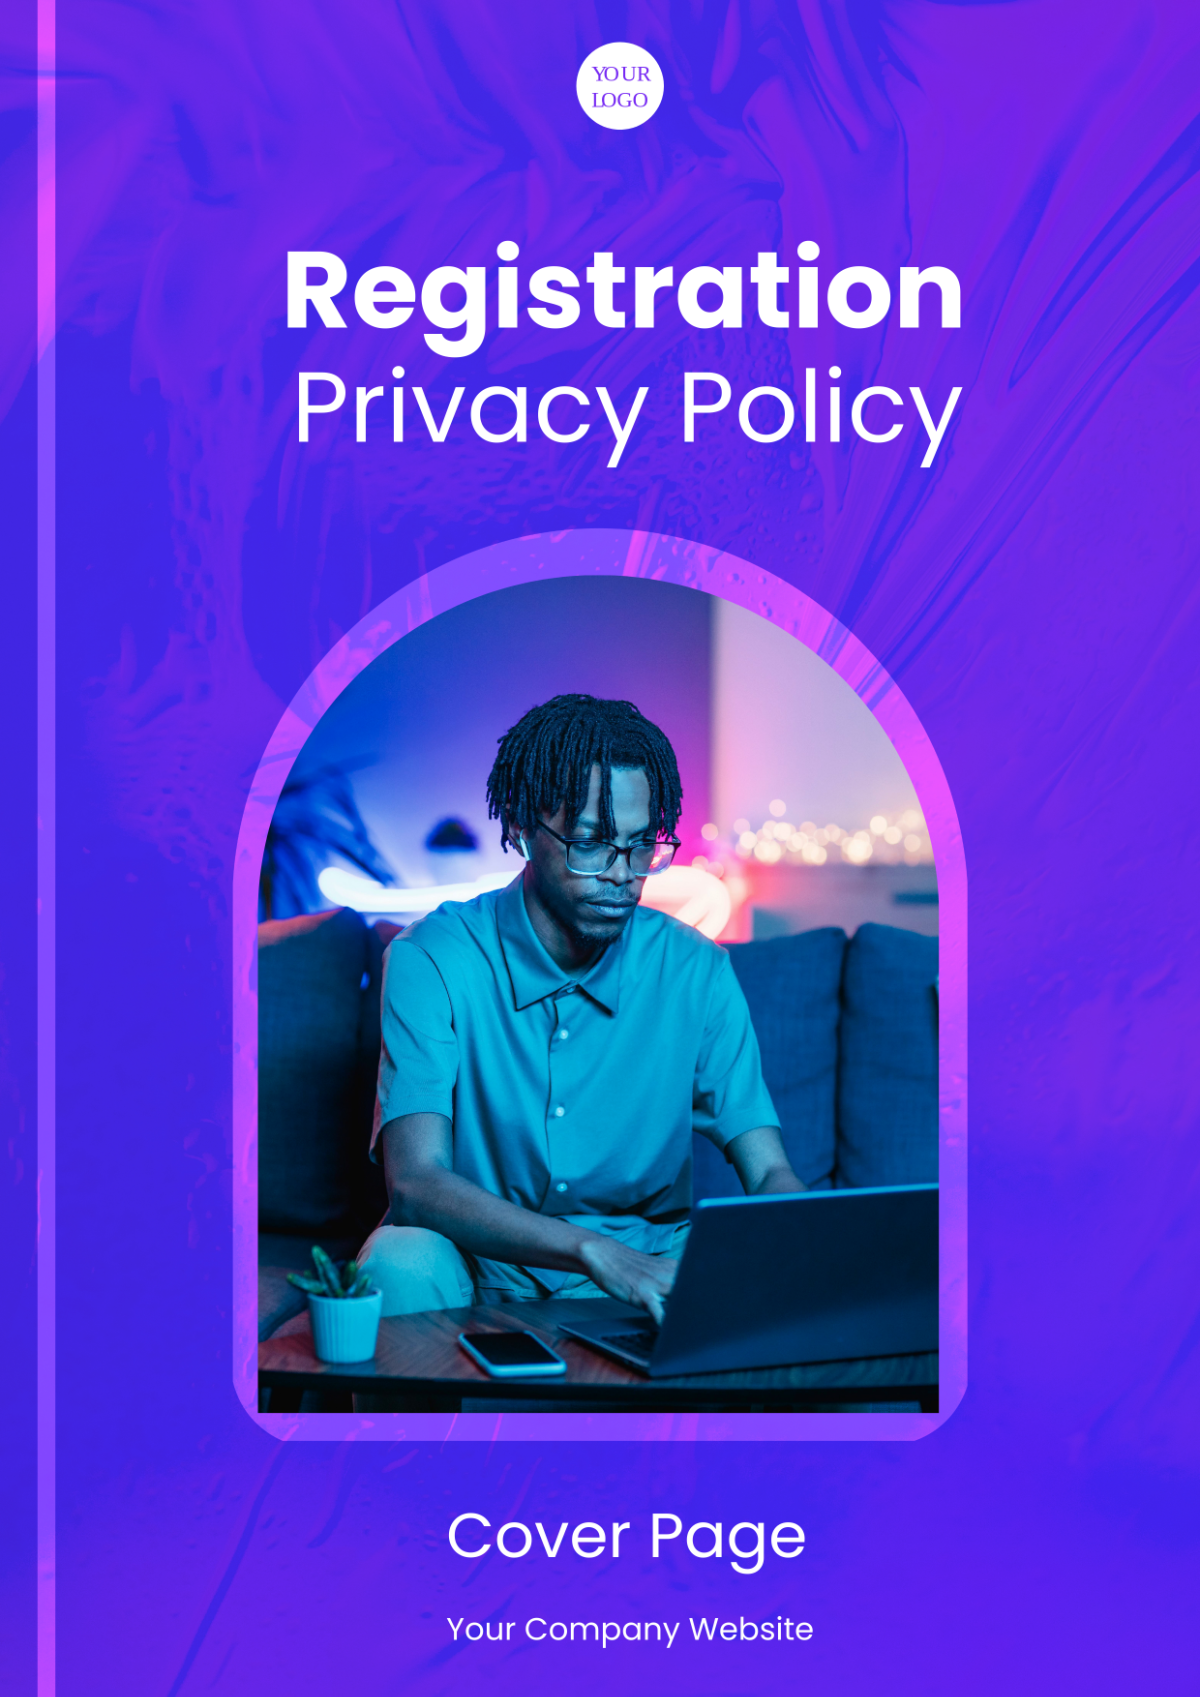 Registration Privacy Policy Cover Page